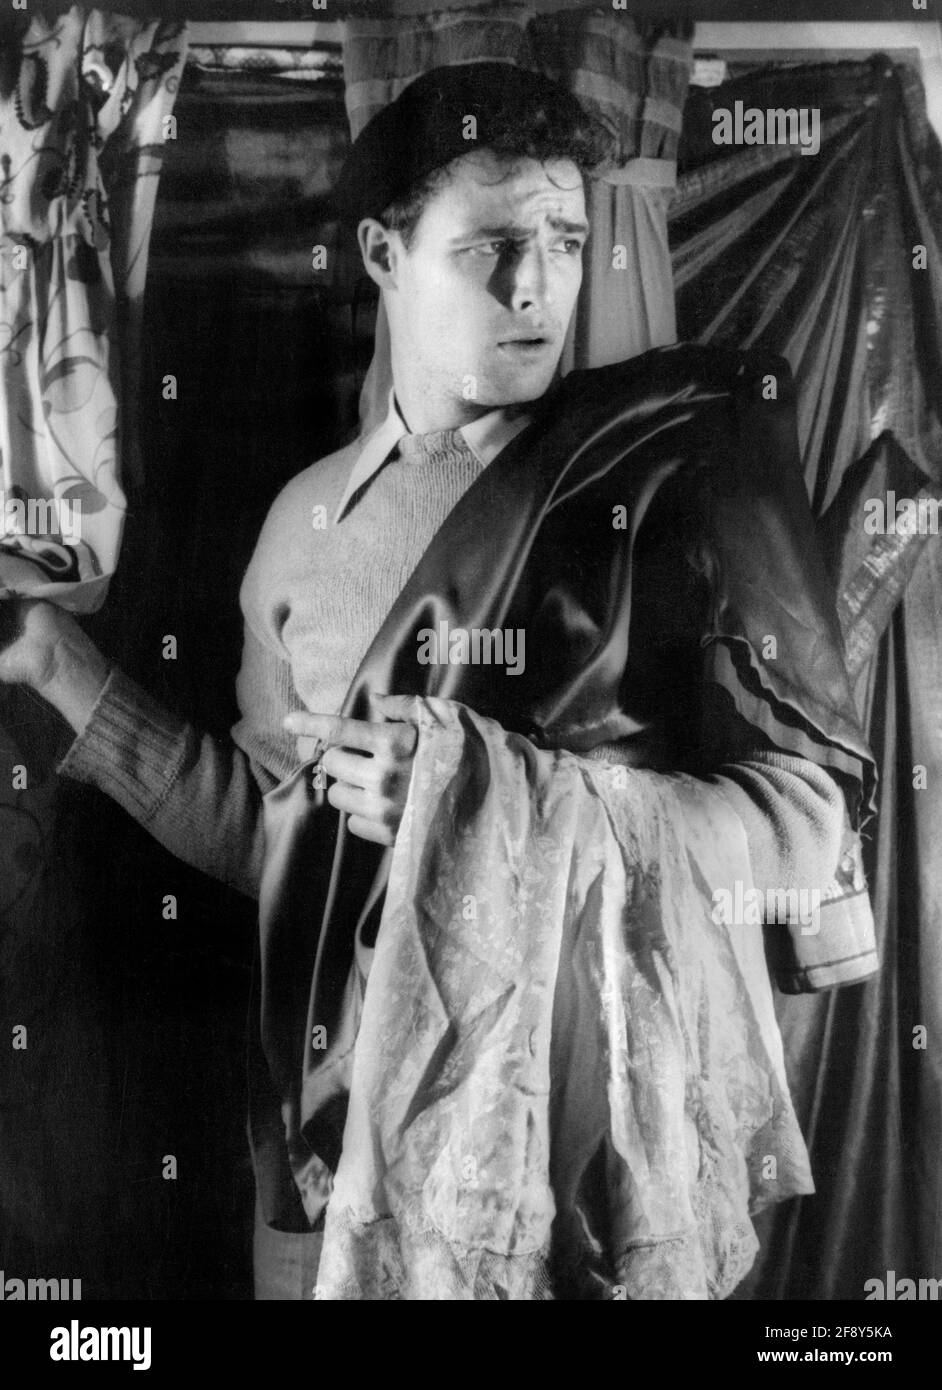 Marlon Brando. Portrait of the American actor and film director, Marlon Brando Jr. (1924-2004) in the Broadway production of 'A Streetcar Named Desire'. Photo by Carl van Vechten, 1948 Stock Photo